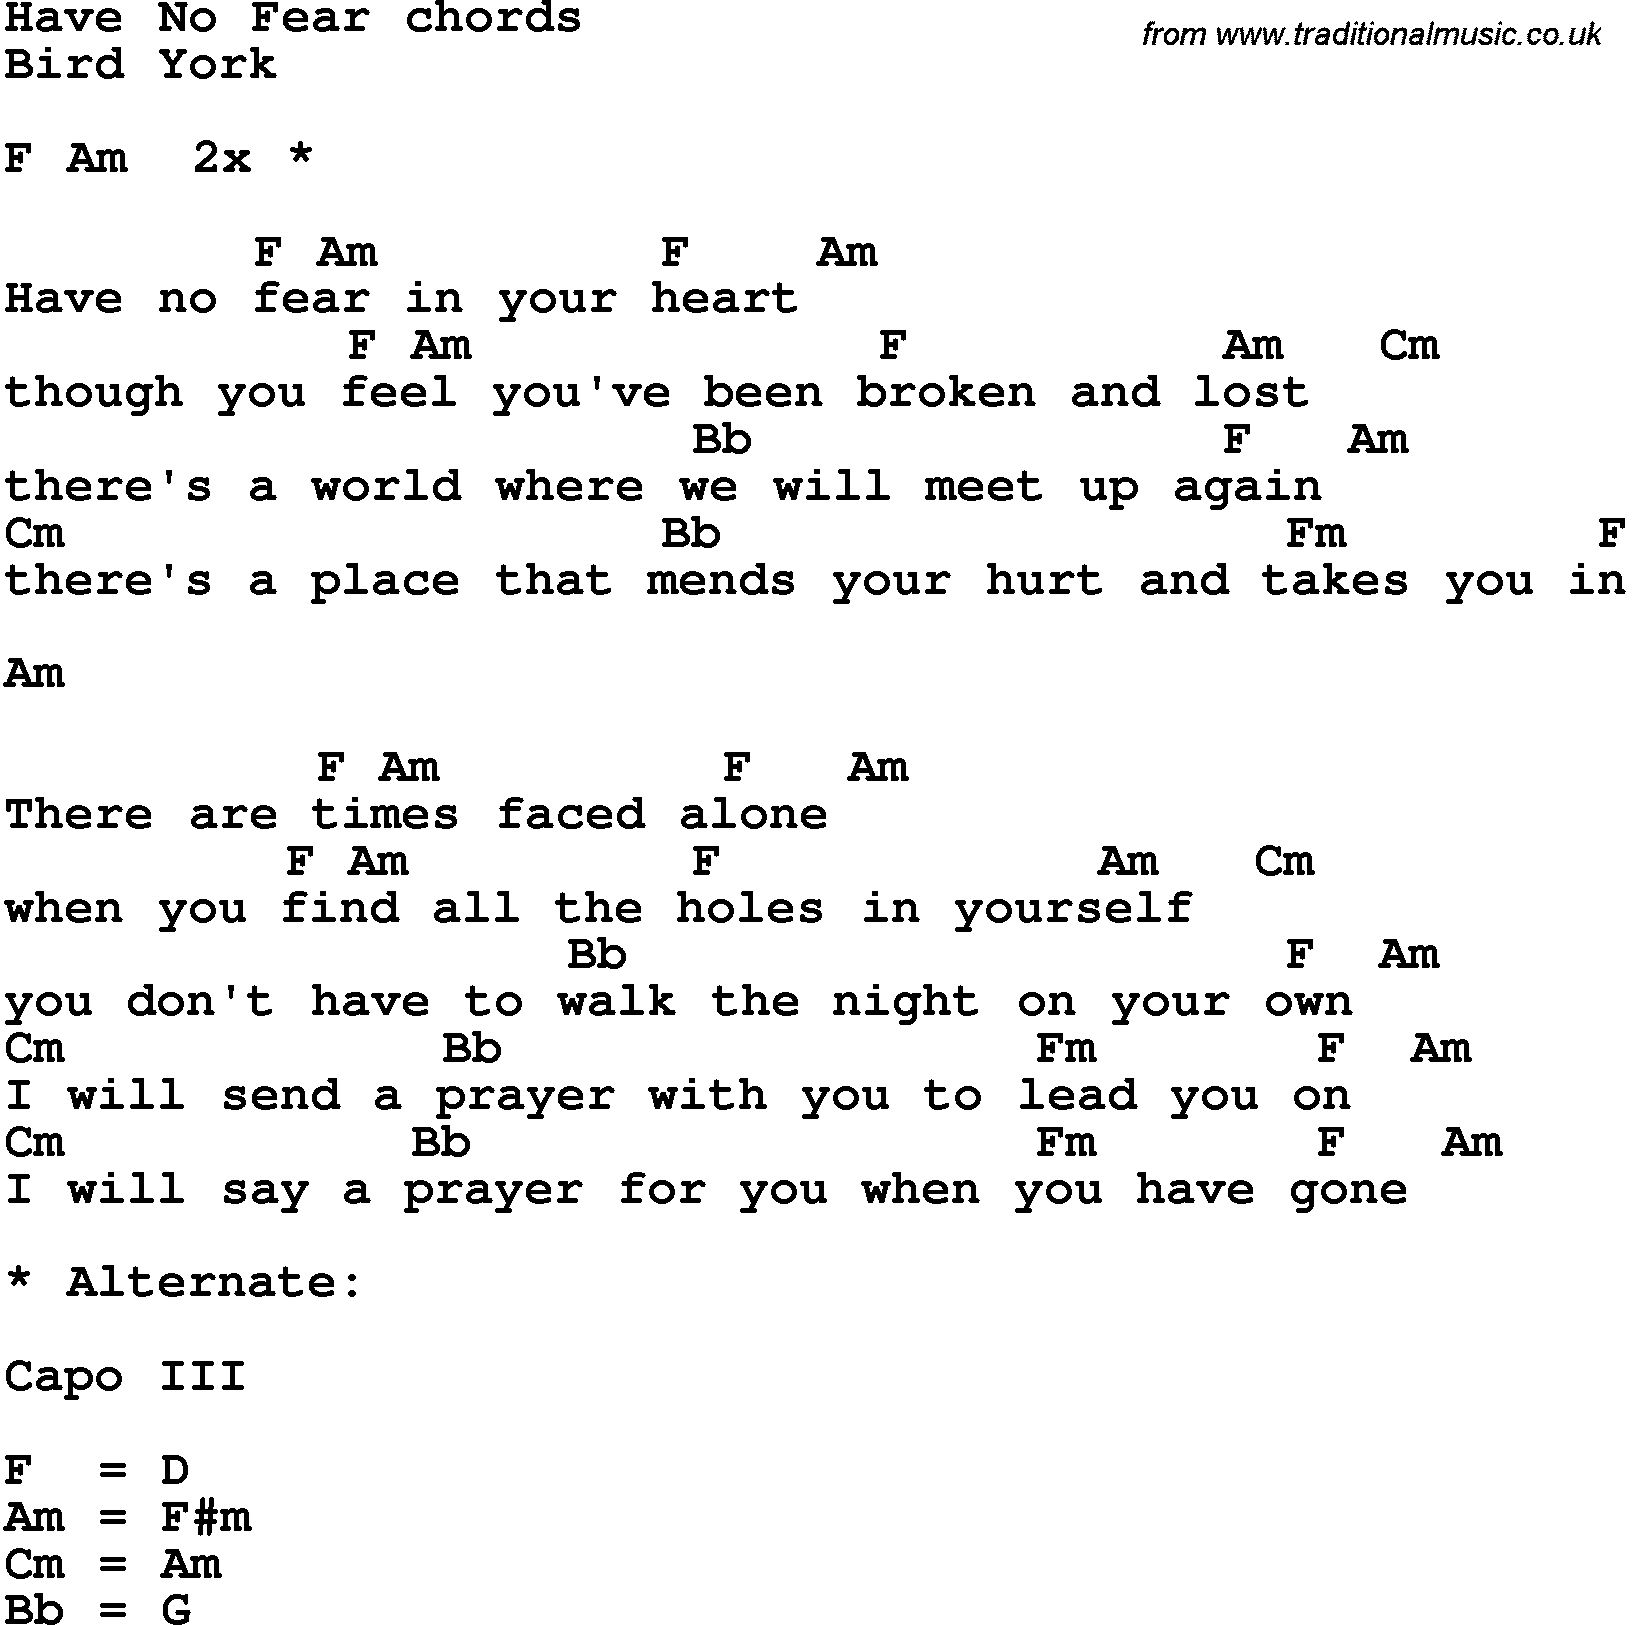 Song Lyrics with guitar chords for Have No Fear